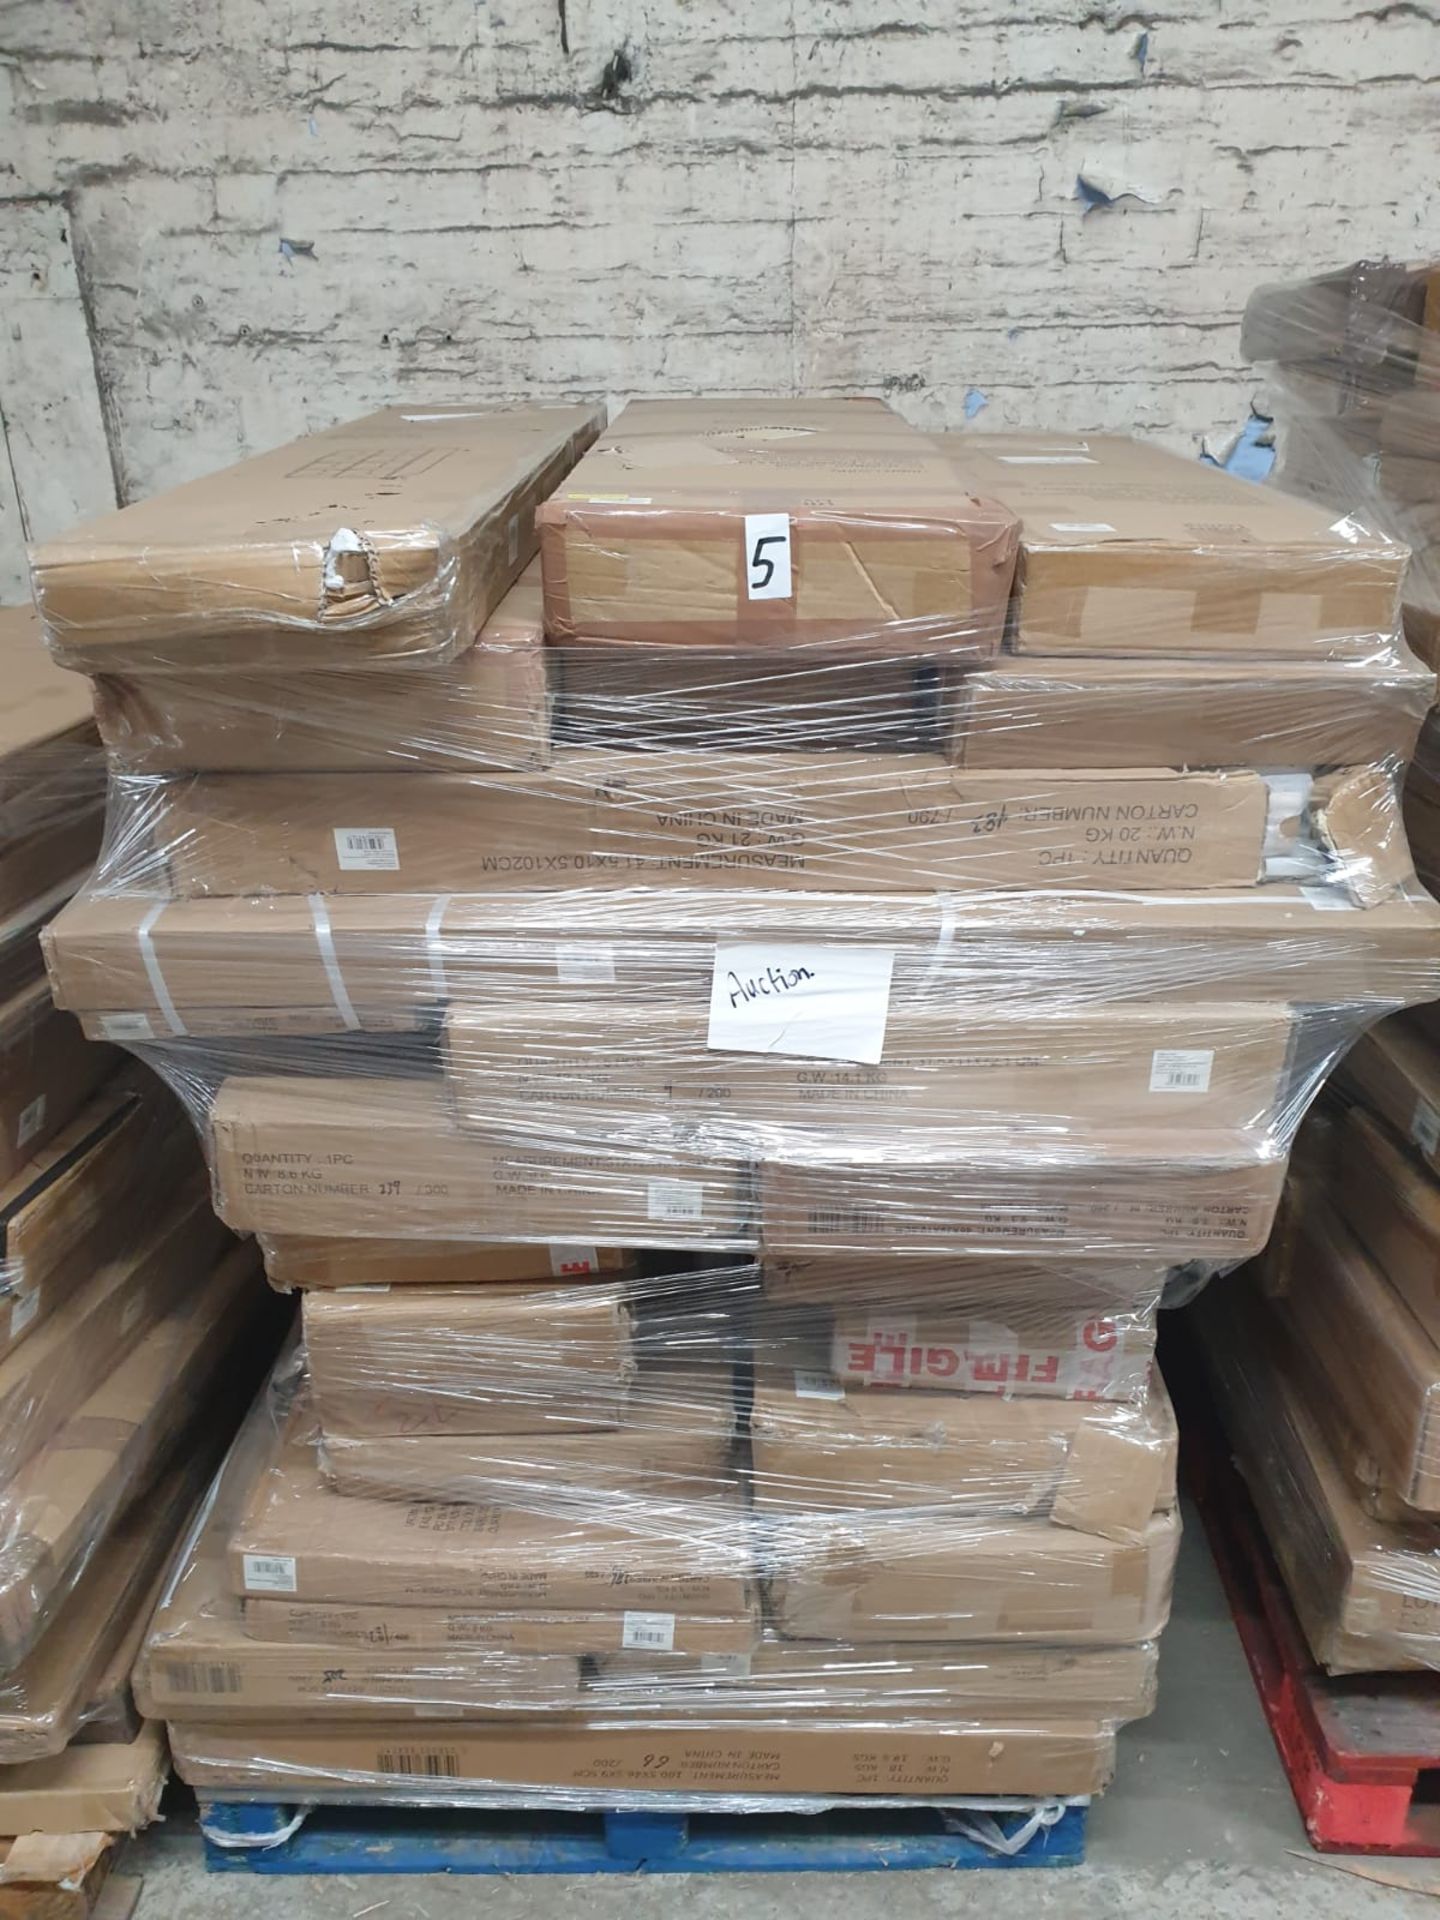 24 Pallets of Flat Packed Home Furniture from Homega | Cube Storage, Wardrobes, Sideboards & More - Image 25 of 29